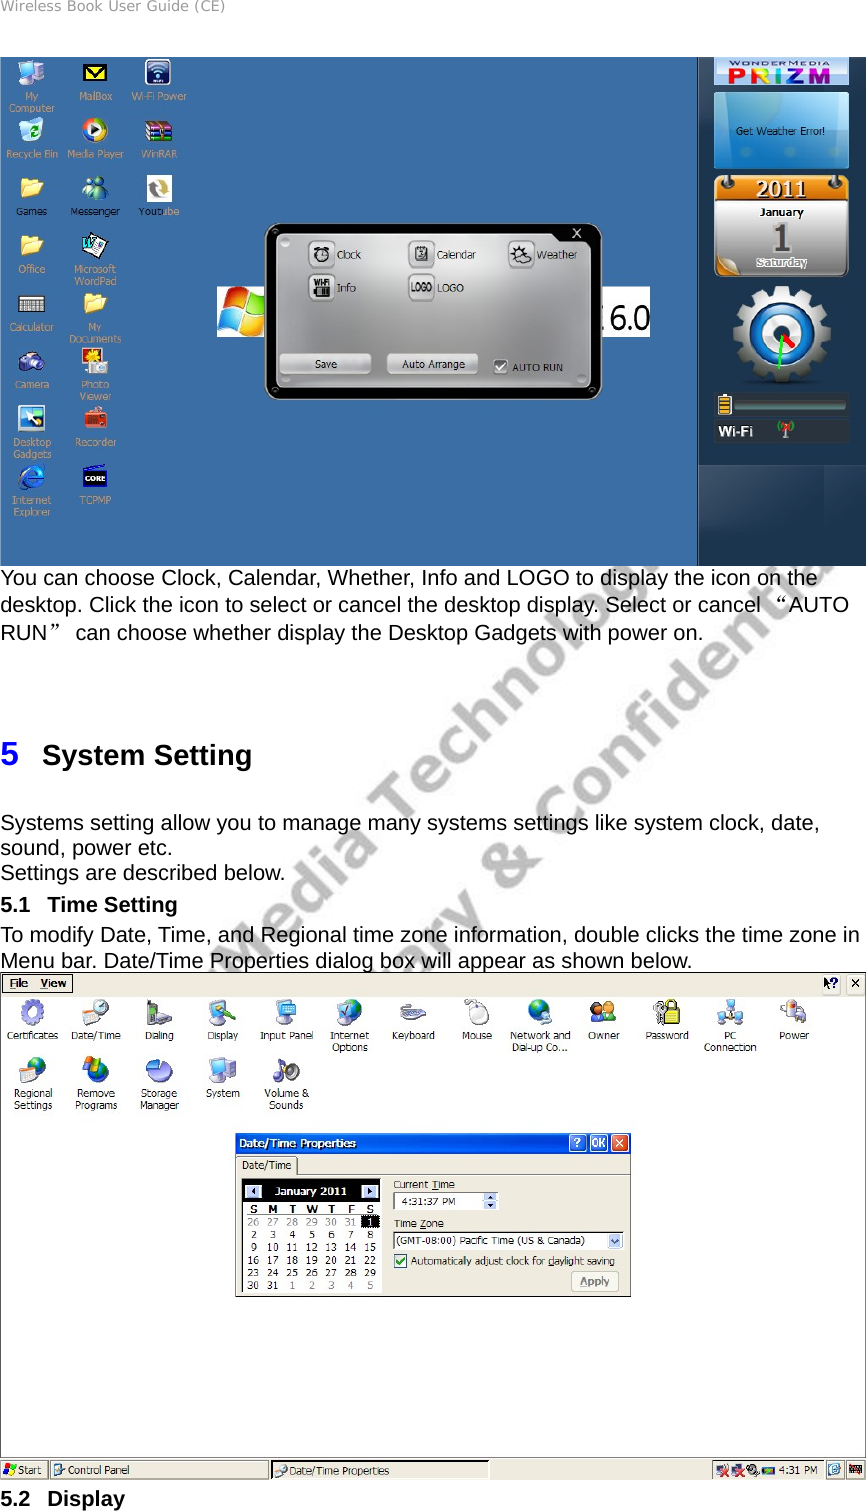 Wireless Book User Guide (CE)  You can choose Clock, Calendar, Whether, Info and LOGO to display the icon on the desktop. Click the icon to select or cancel the desktop display. Select or cancel “AUTO RUN” can choose whether display the Desktop Gadgets with power on. 5  System Setting Systems setting allow you to manage many systems settings like system clock, date, sound, power etc. Settings are described below. 5.1   Time Setting To modify Date, Time, and Regional time zone information, double clicks the time zone in Menu bar. Date/Time Properties dialog box will appear as shown below.  5.2   Display 